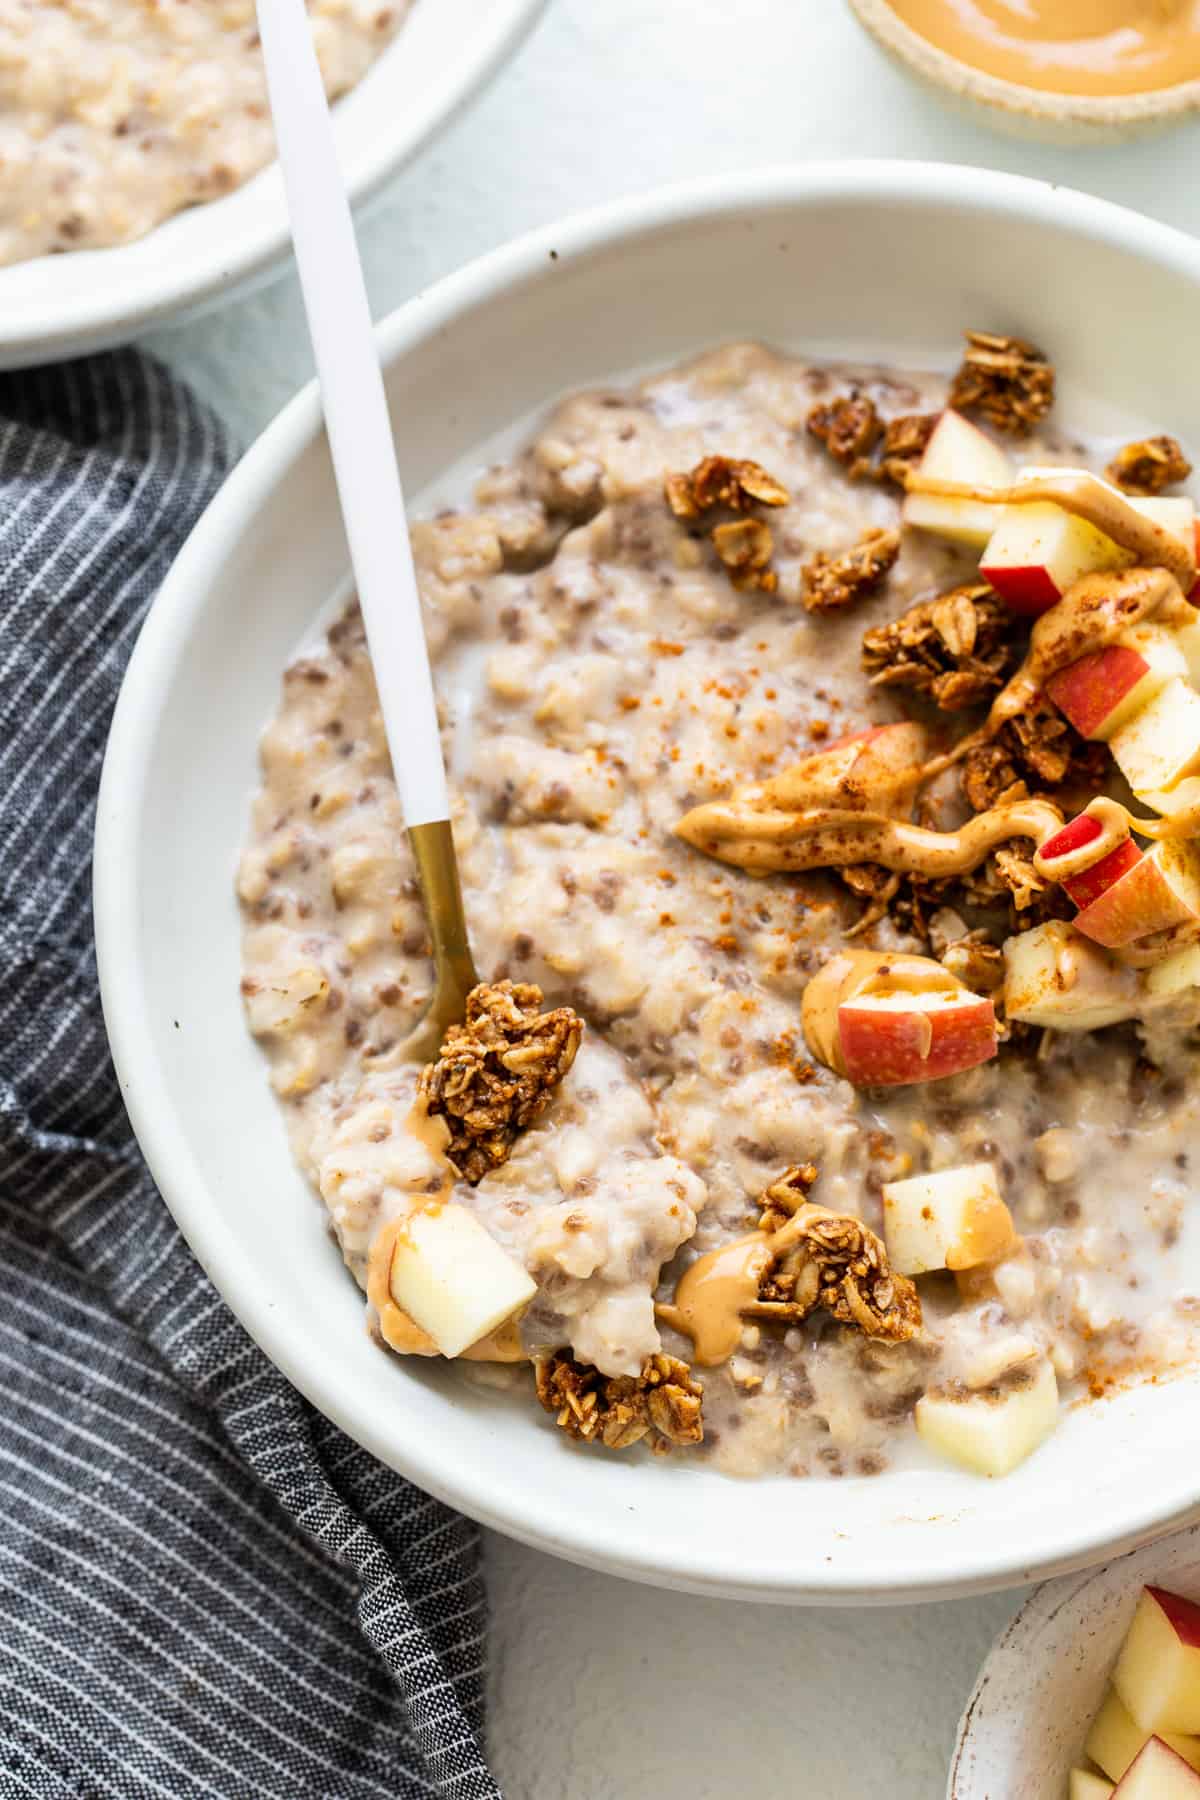 Apple cinnamon oatmeal topped with granola.